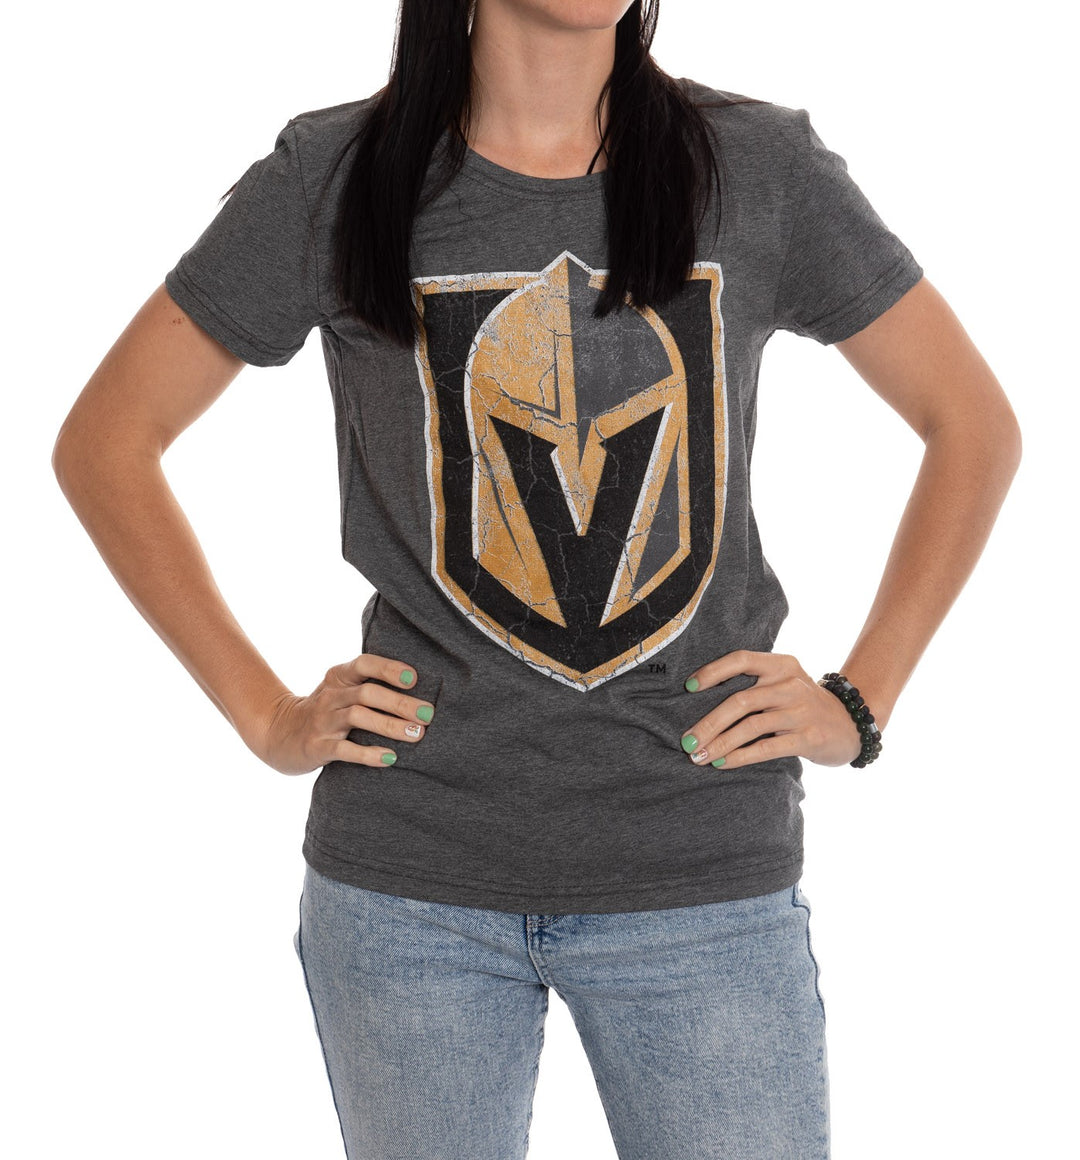 Vegas Golden Knights Women's Distressed Print Fitted Crew Neck Premium T-Shirt - Charcoal